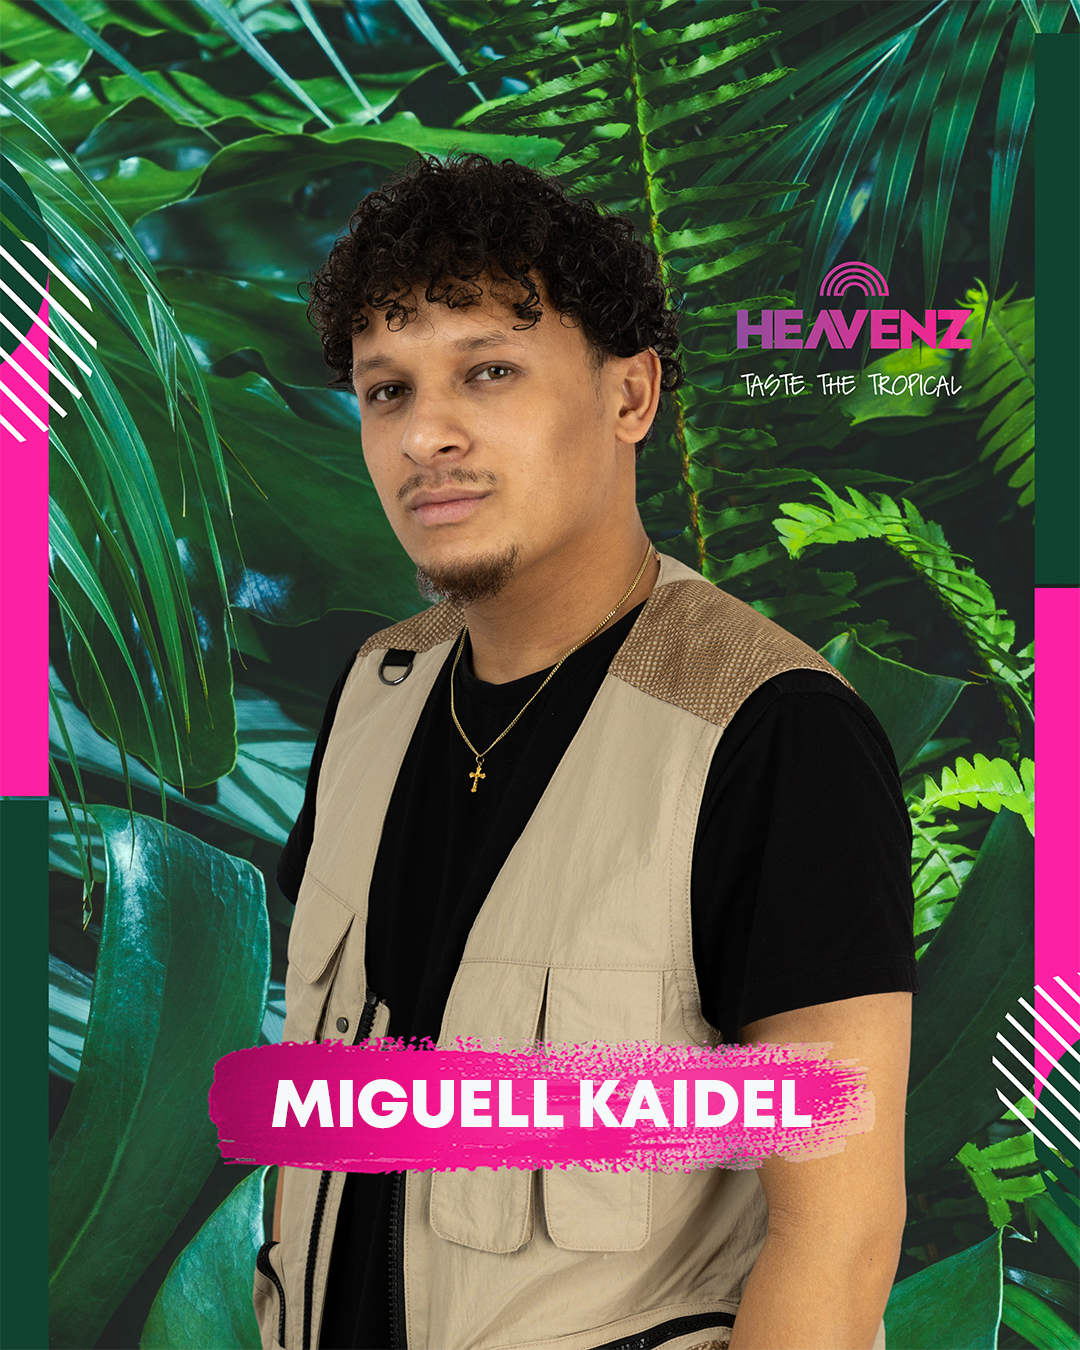 Miguell Kaidel